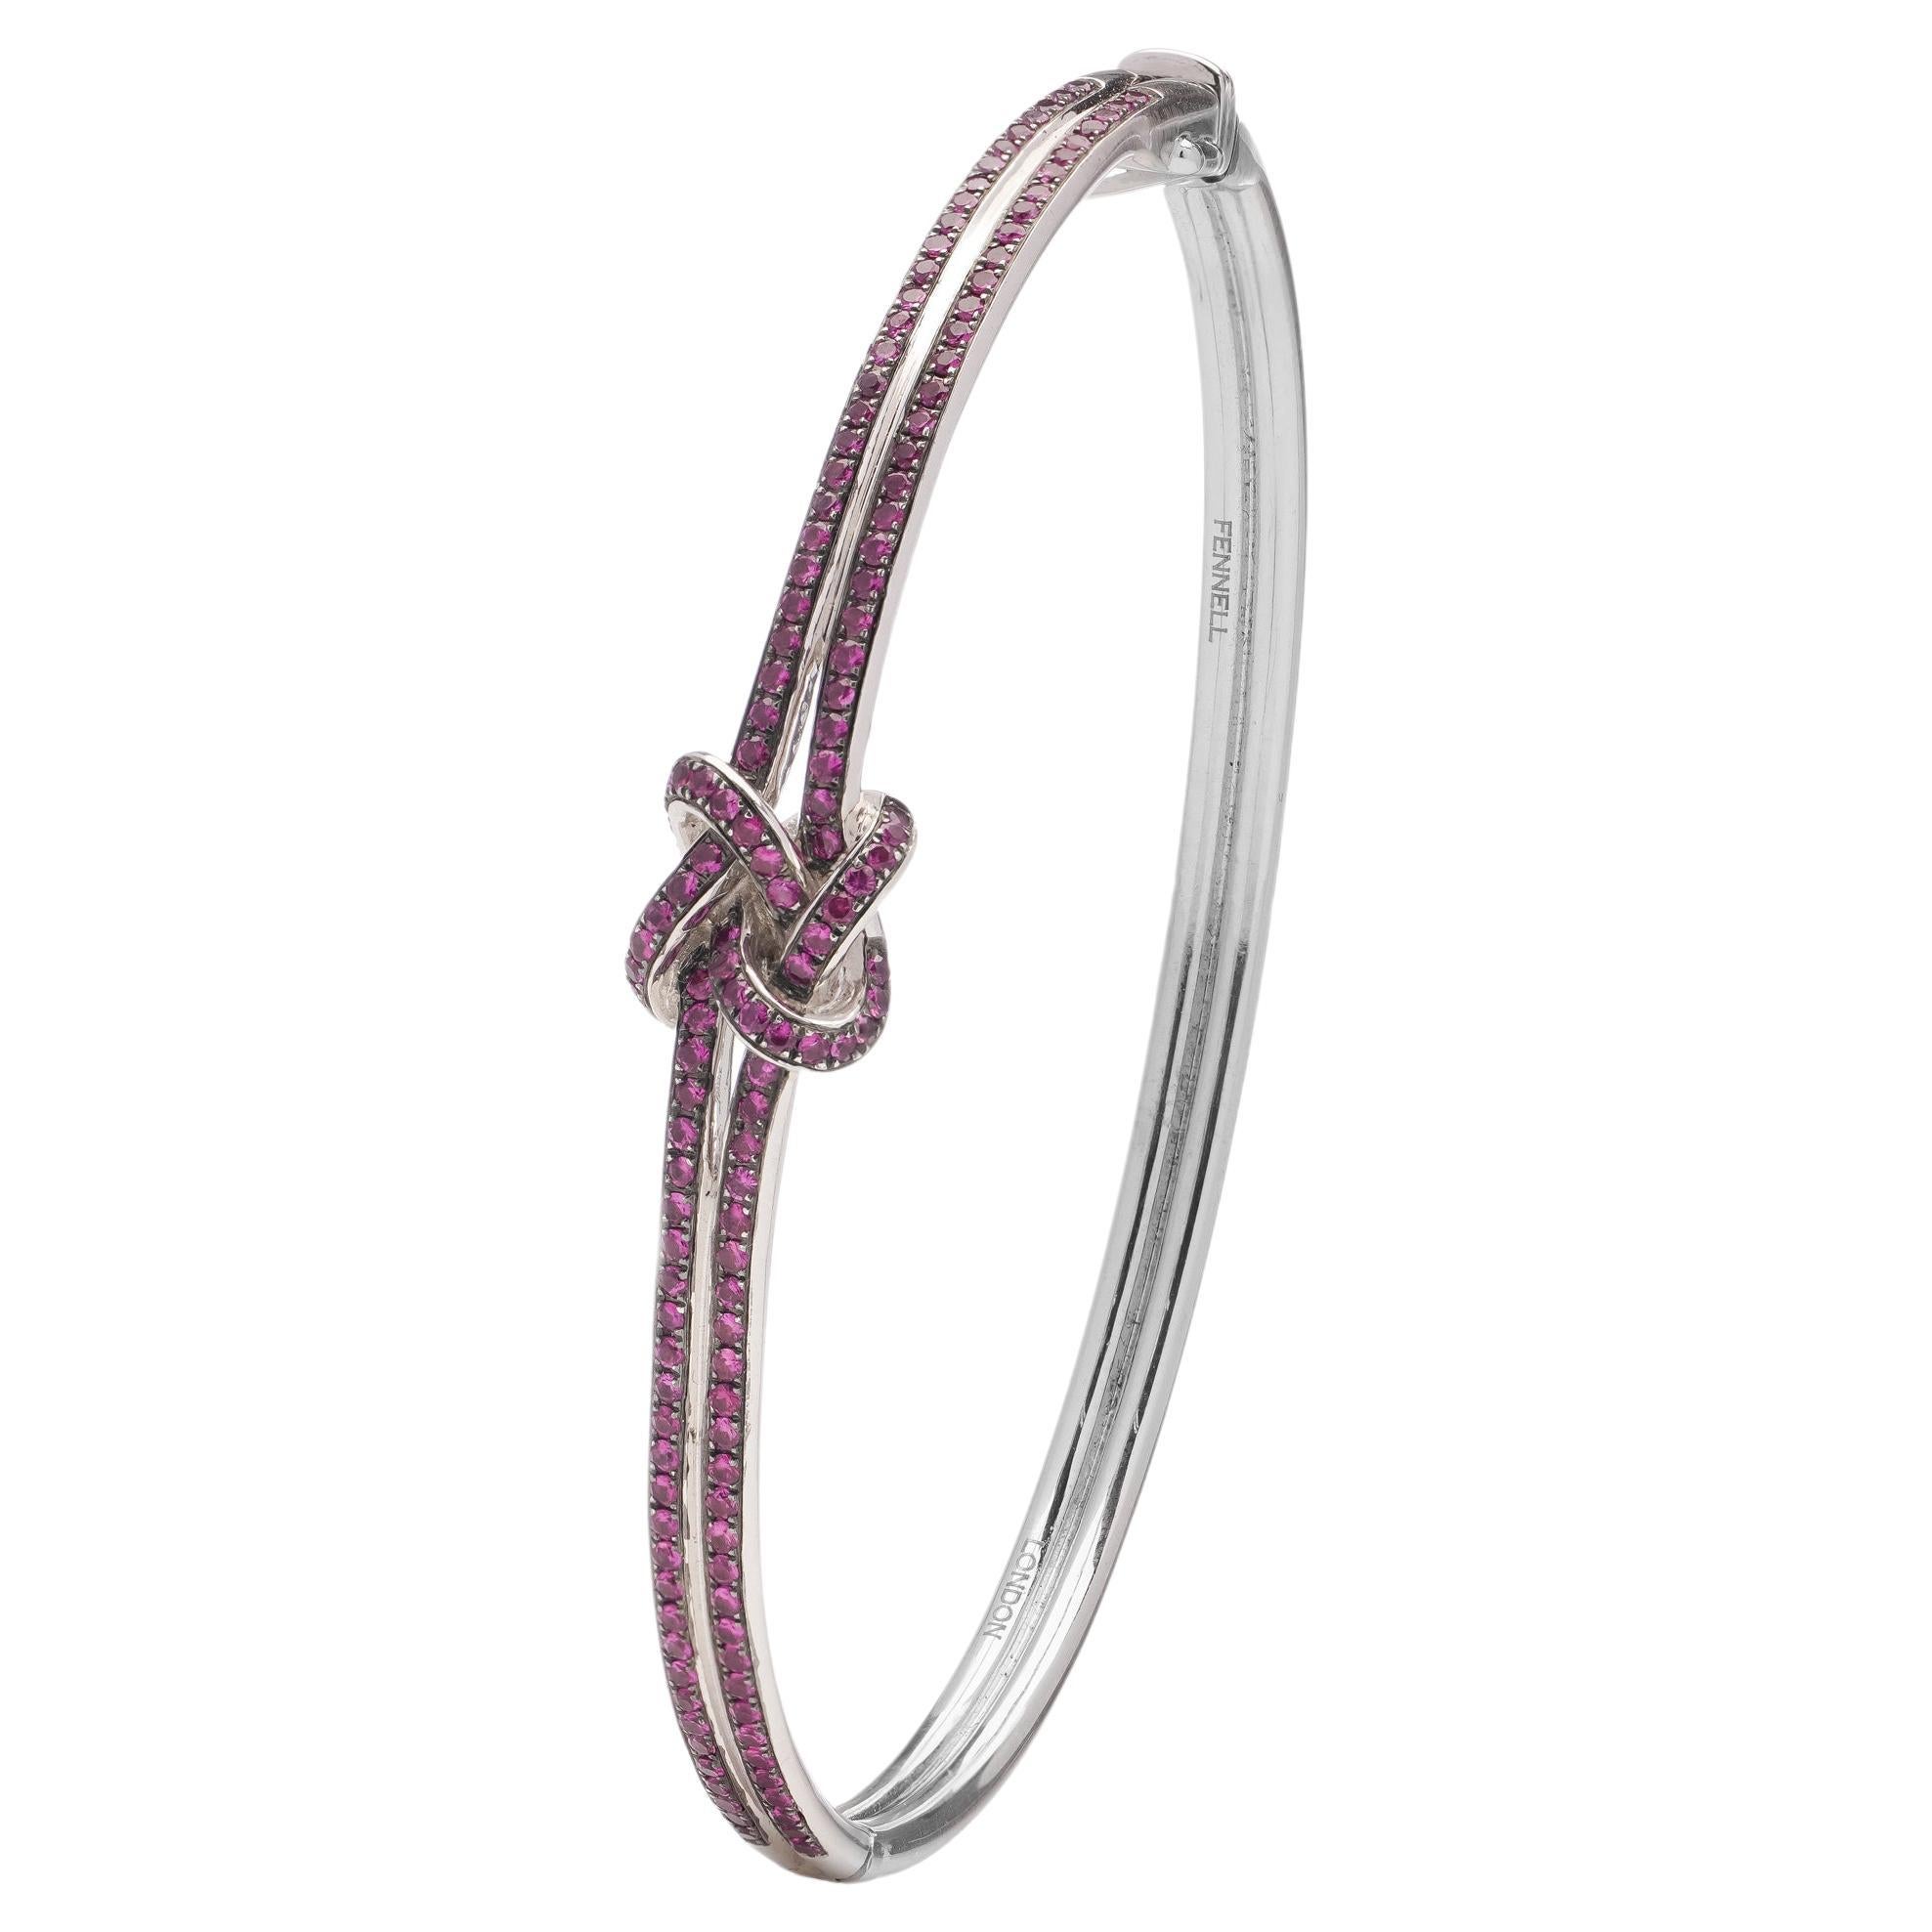 Theo Fennell 18kt. white gold Gordian knot cuff bracelet with pink sapphires